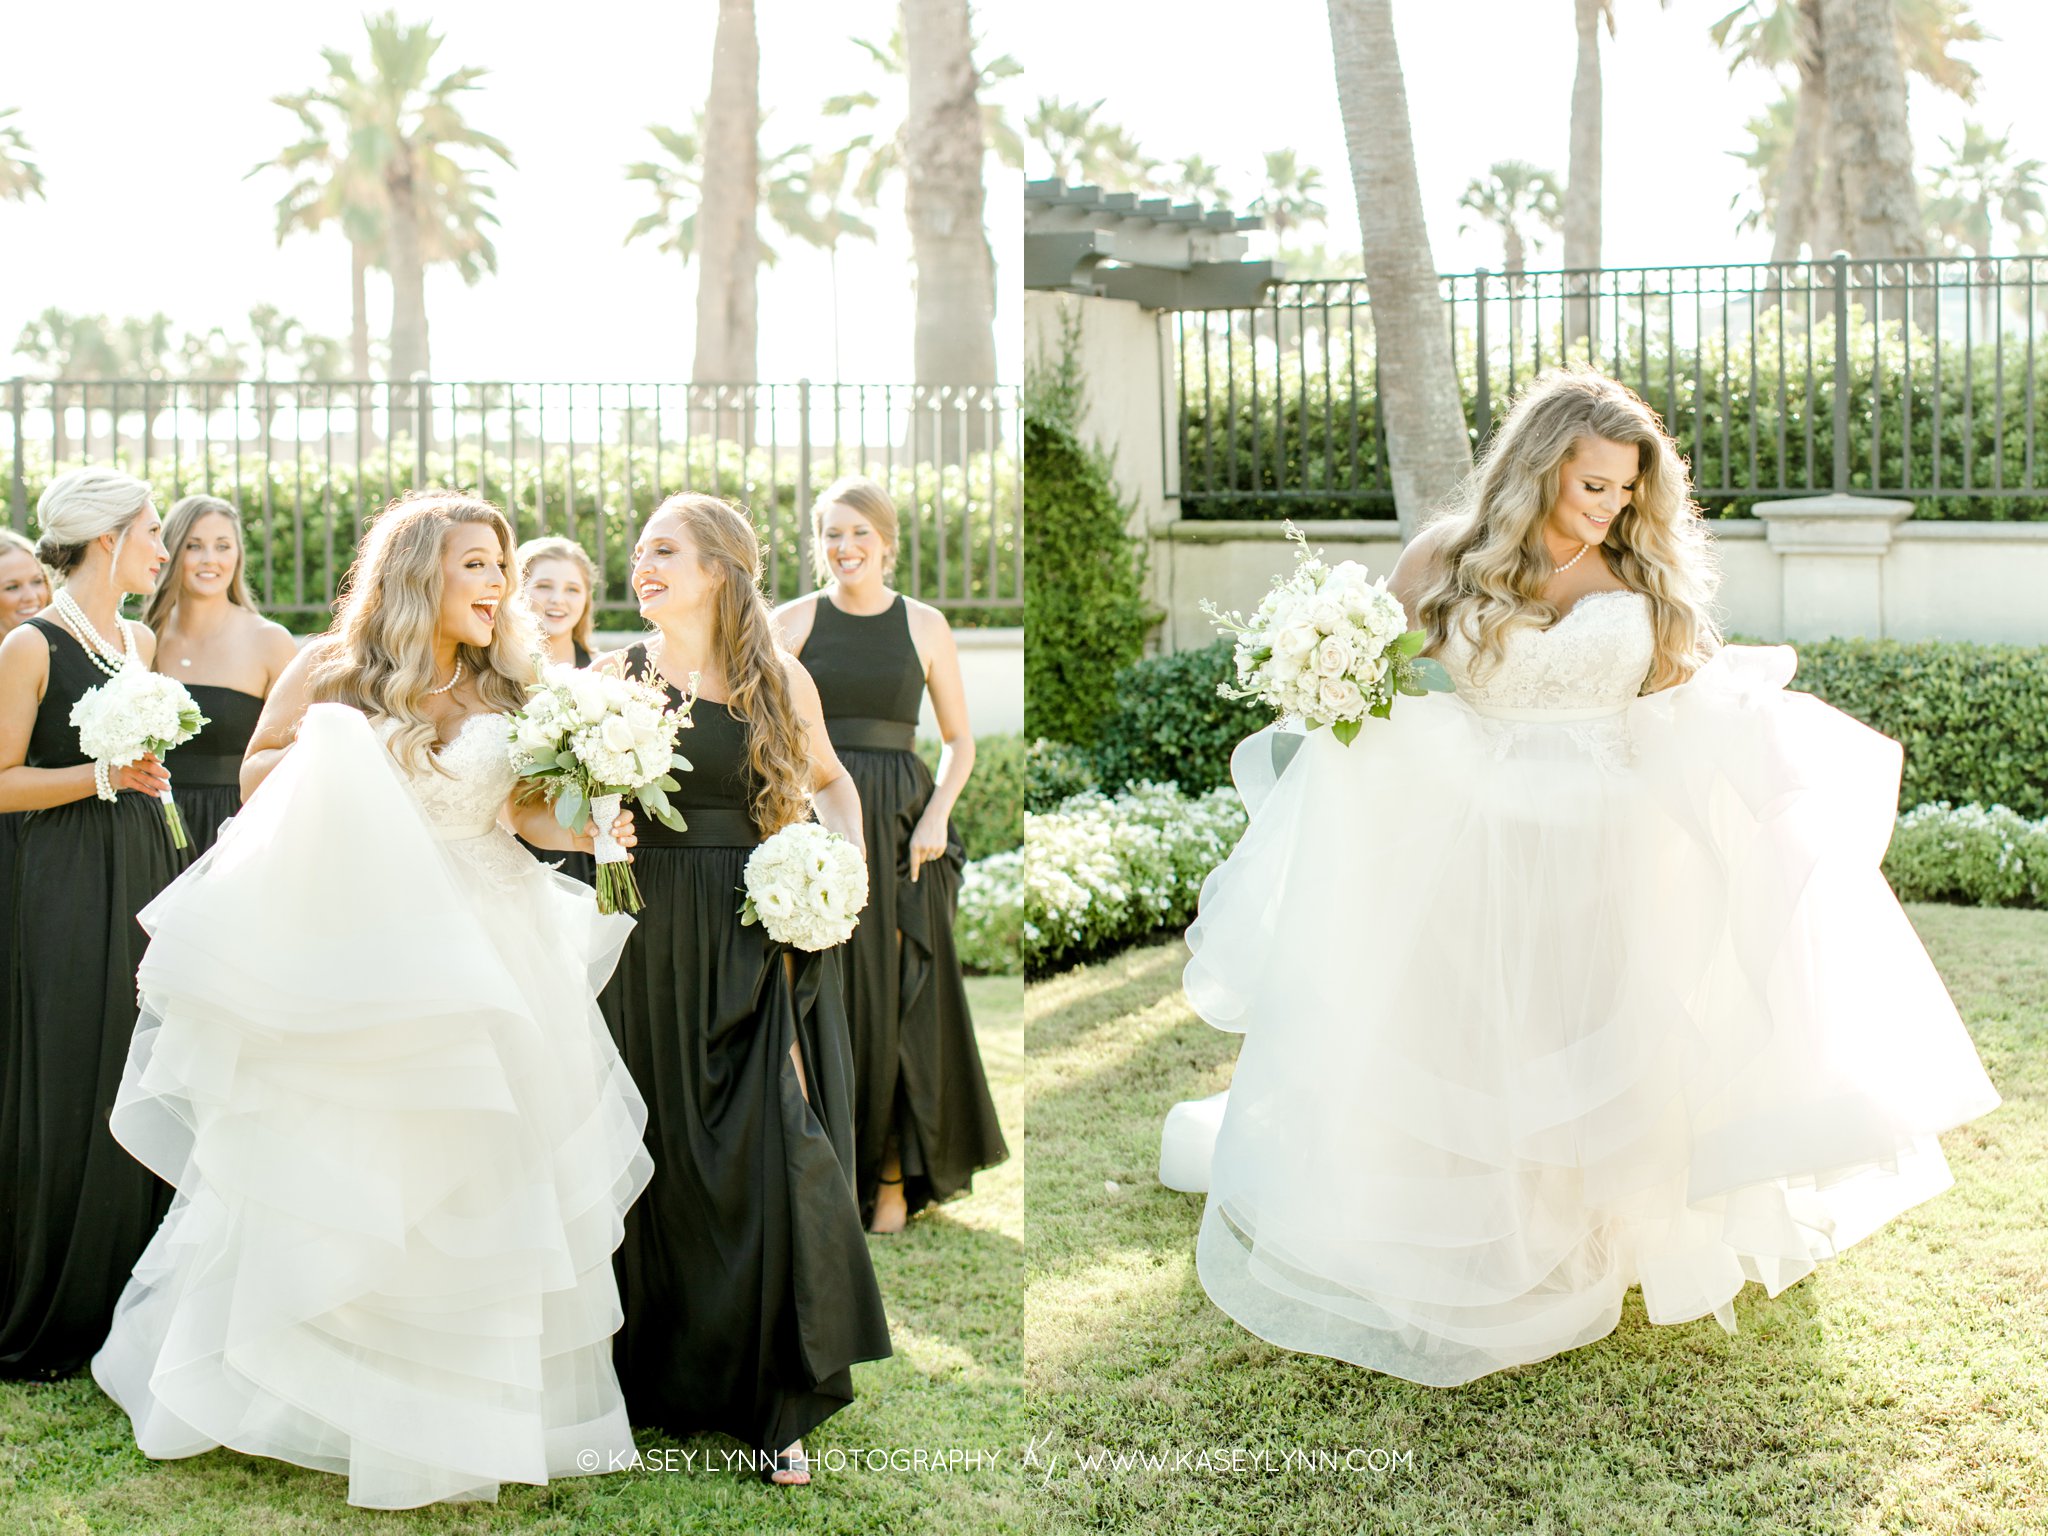 Black and Gold Wedding Colors / Kasey Lynn Photography